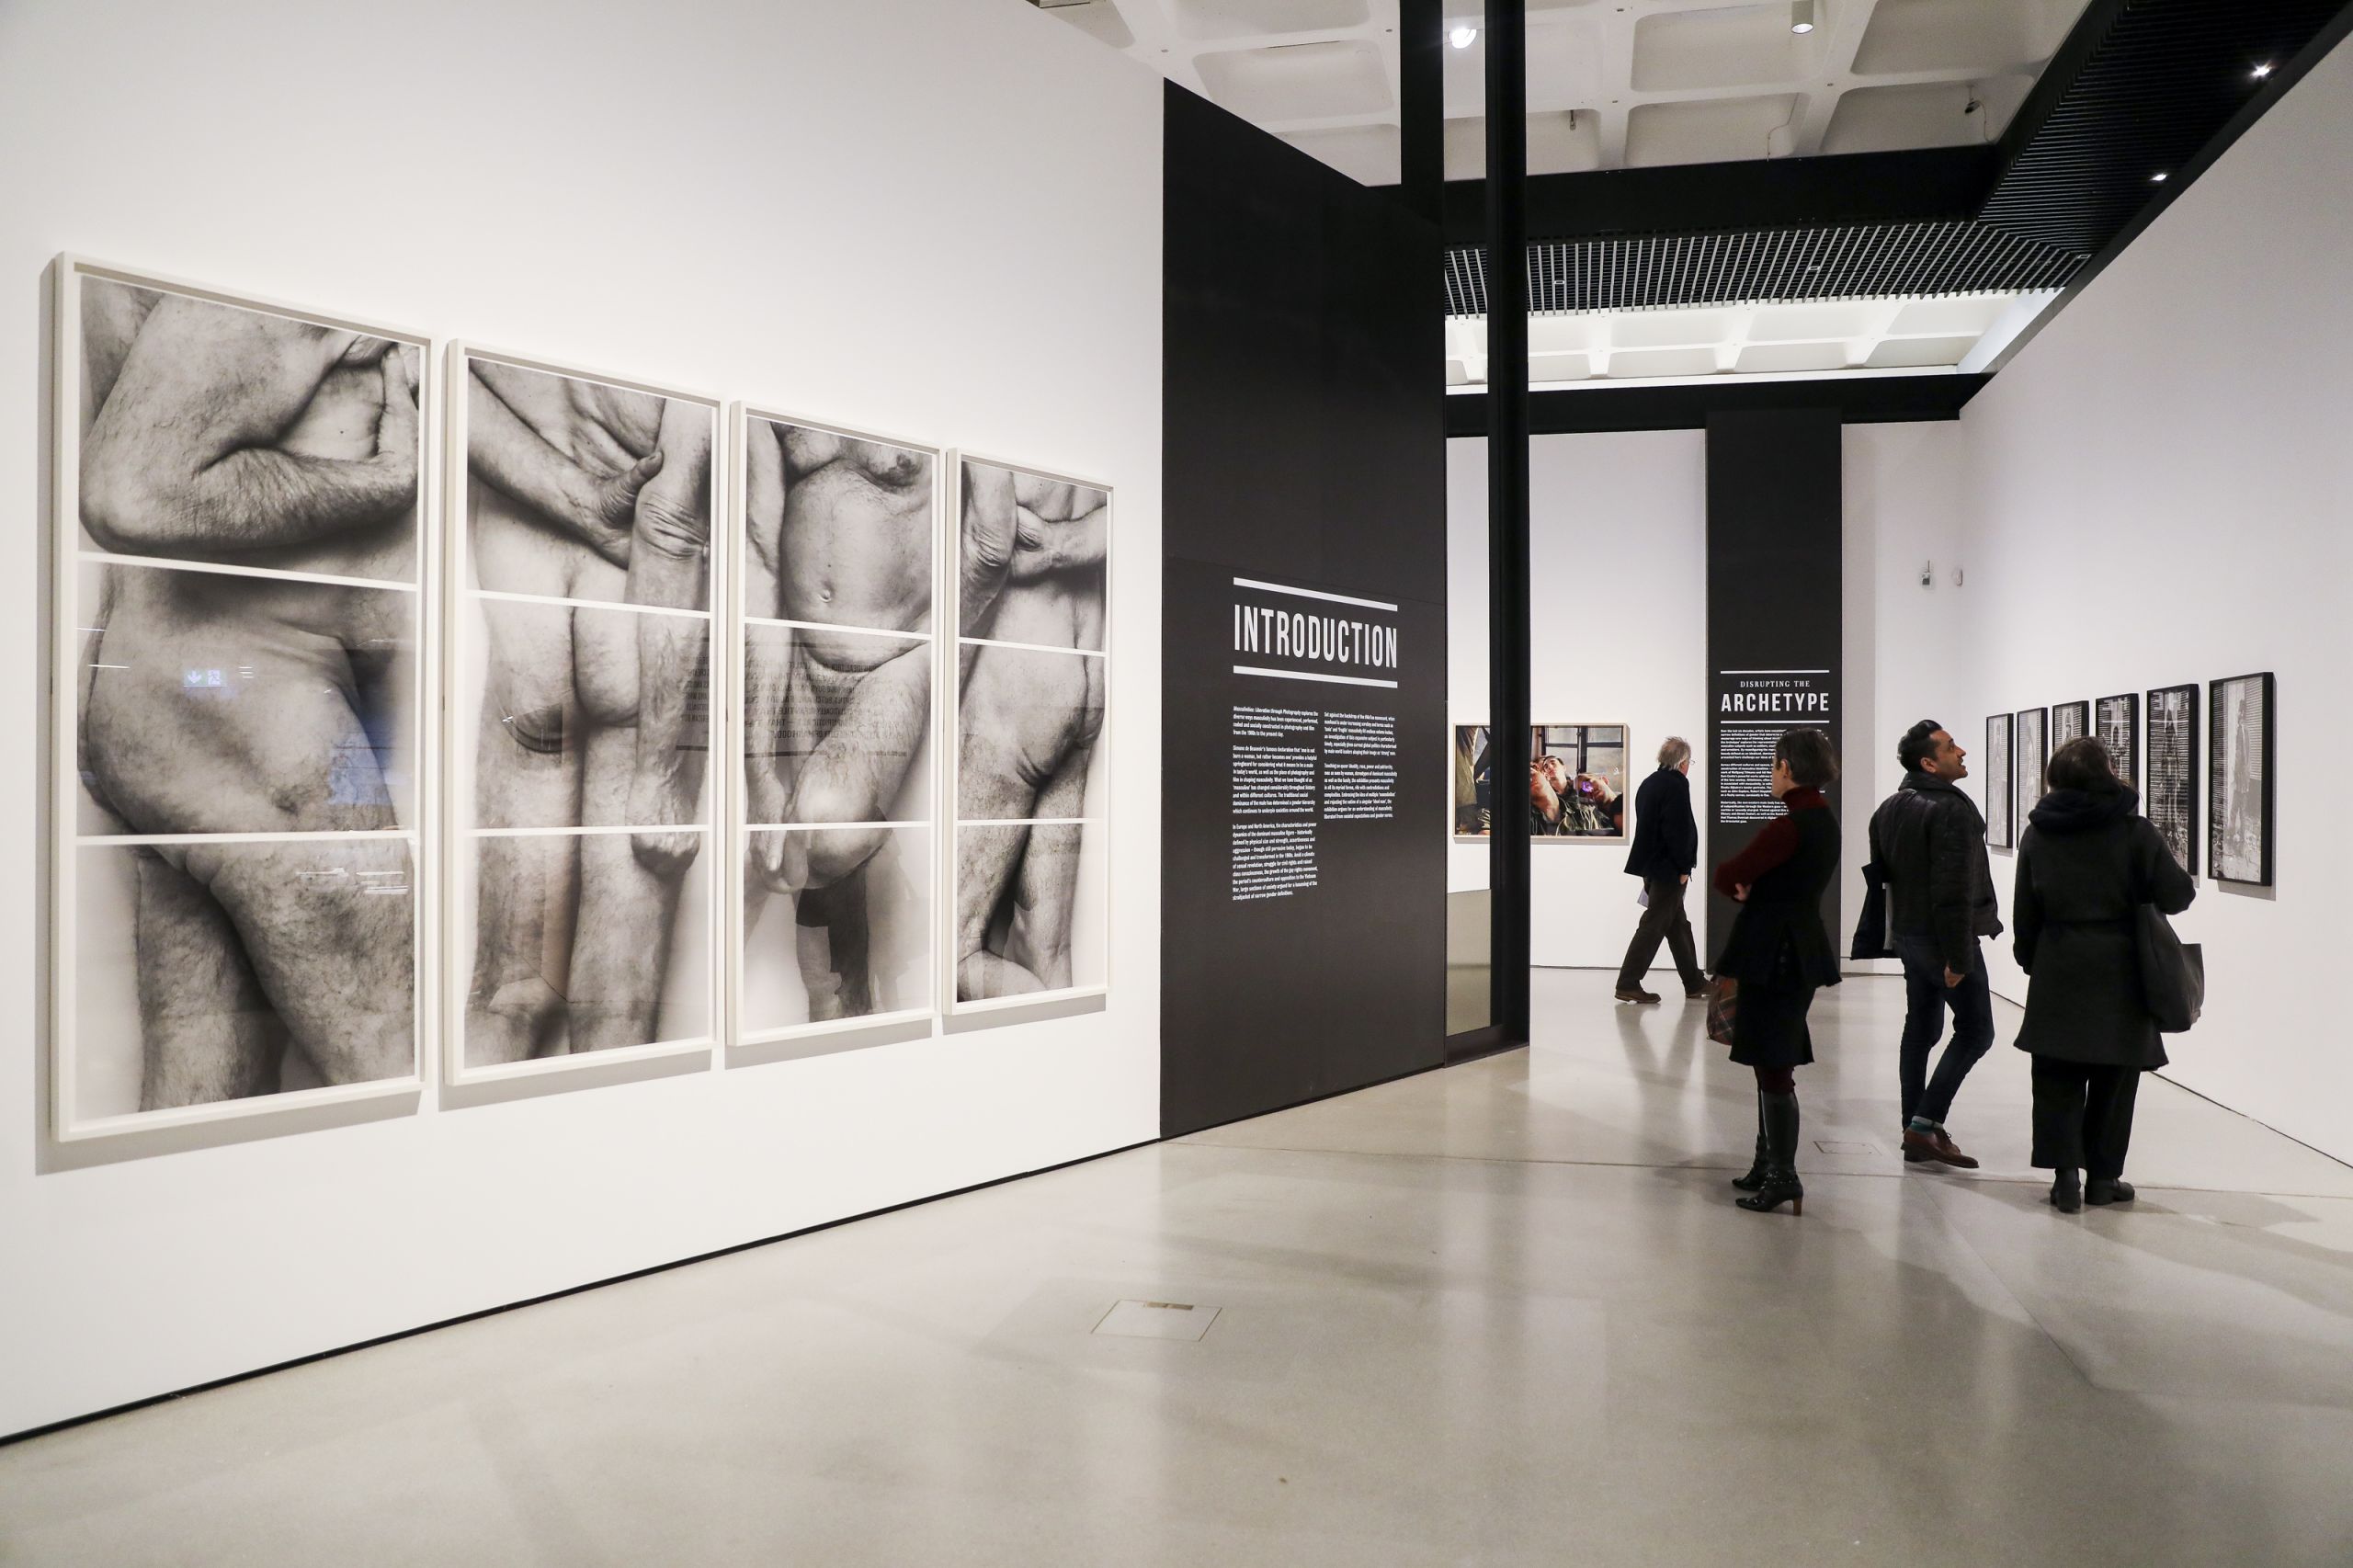 People stand in a white gallery space looking photographs hung on the wall, a large black and white photographic image is displayed, showing the nude figure of an elderly man.